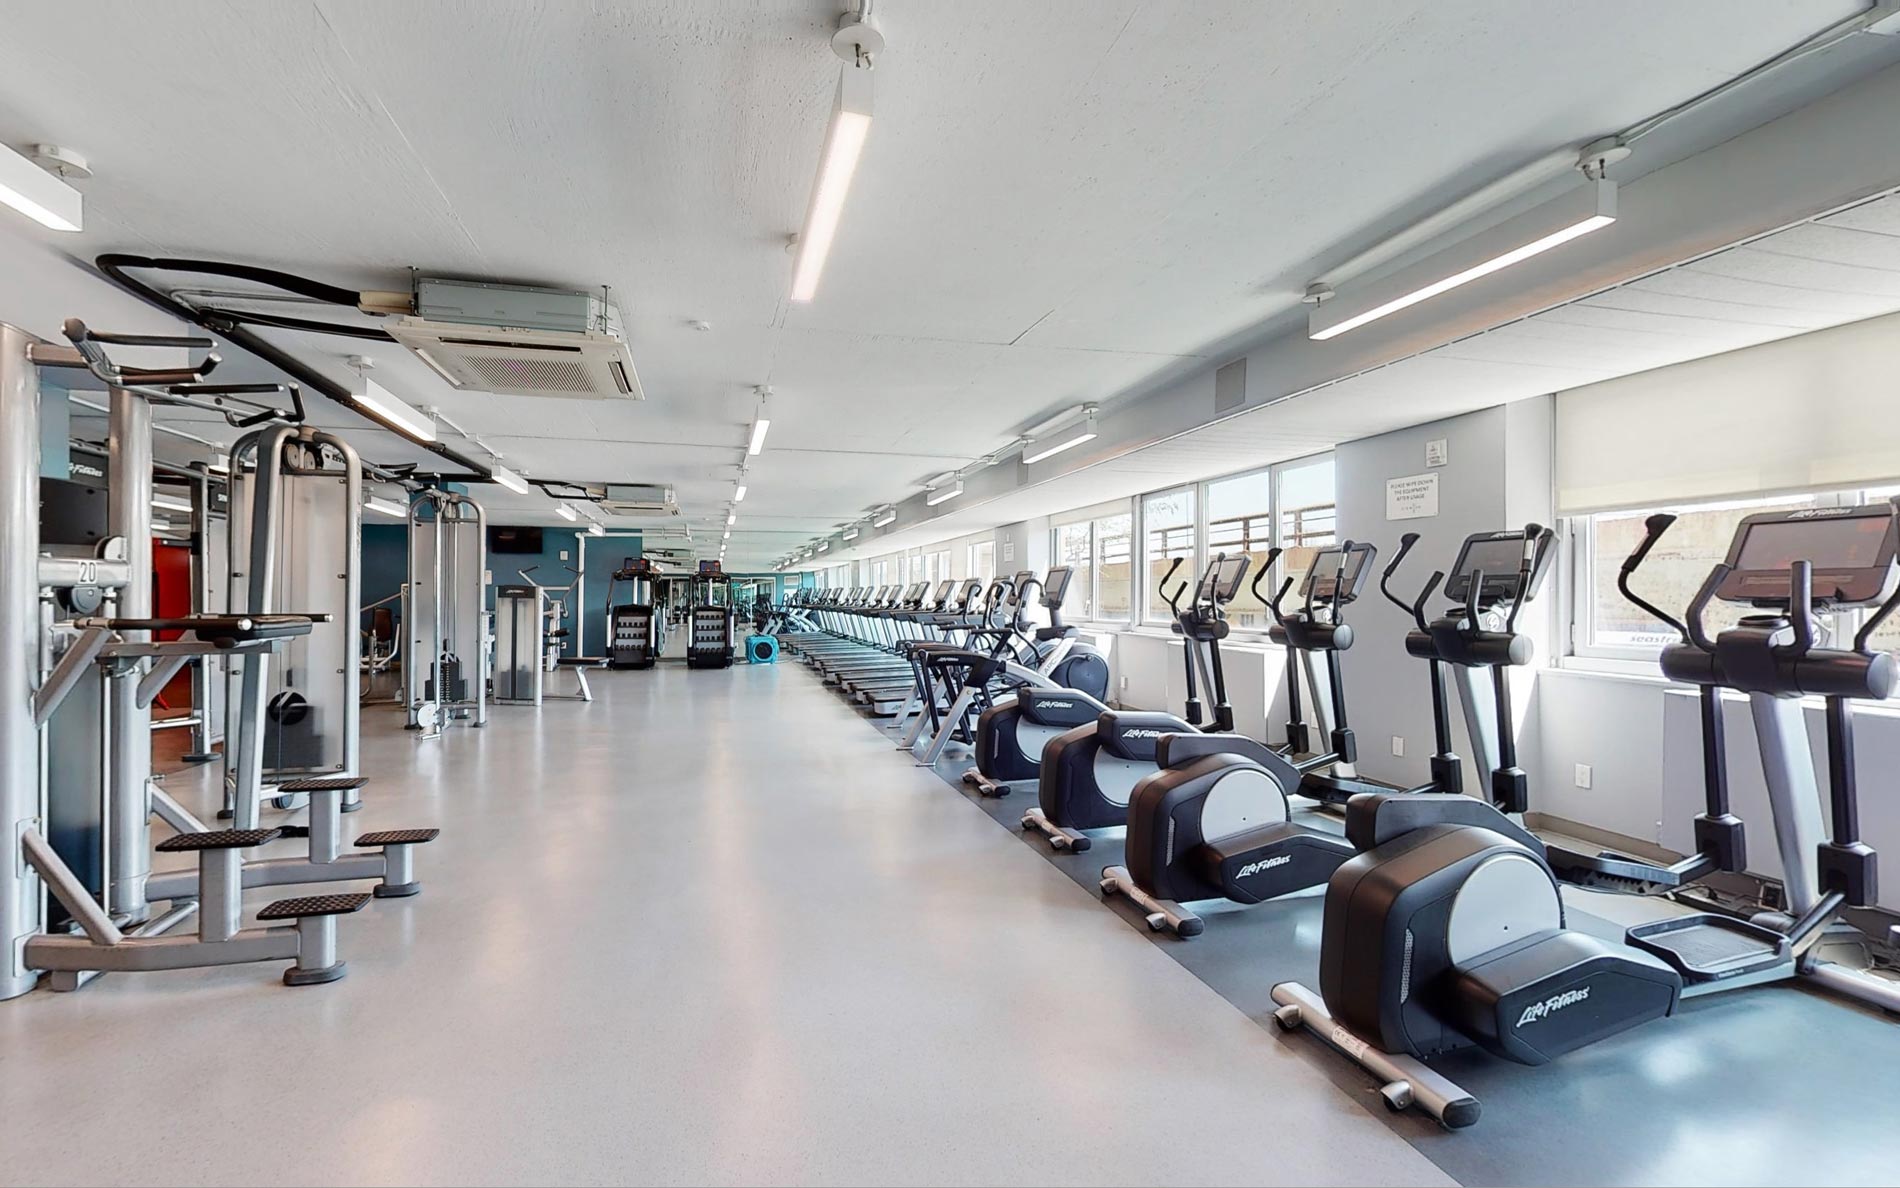 View 34 Fitness center